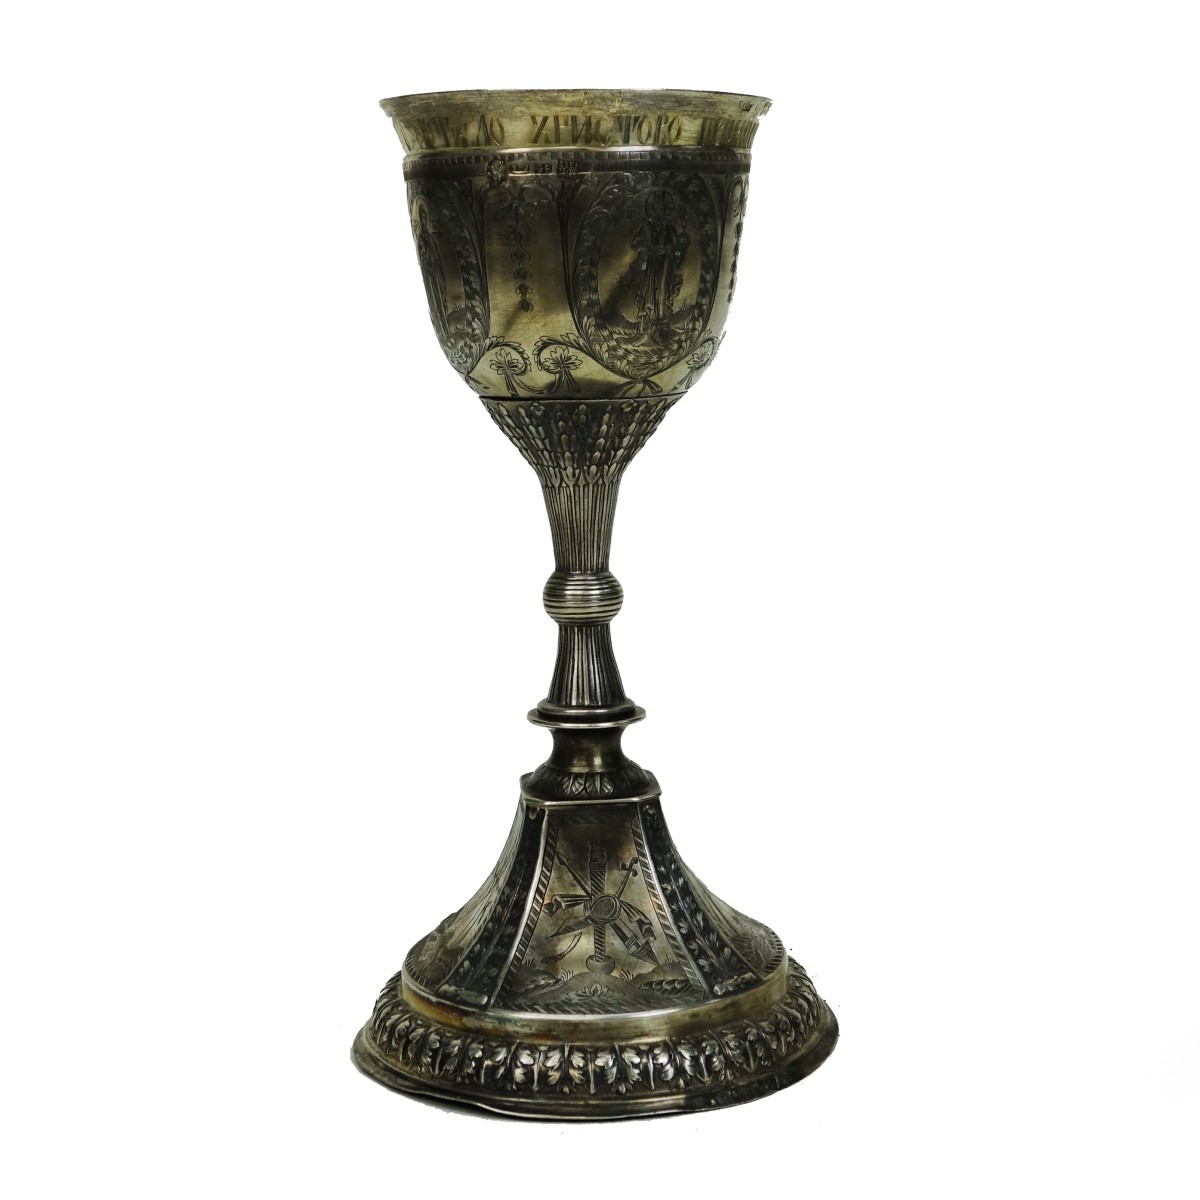 Mikhail Timofeev (Moscow, 1818) Silver Chalice